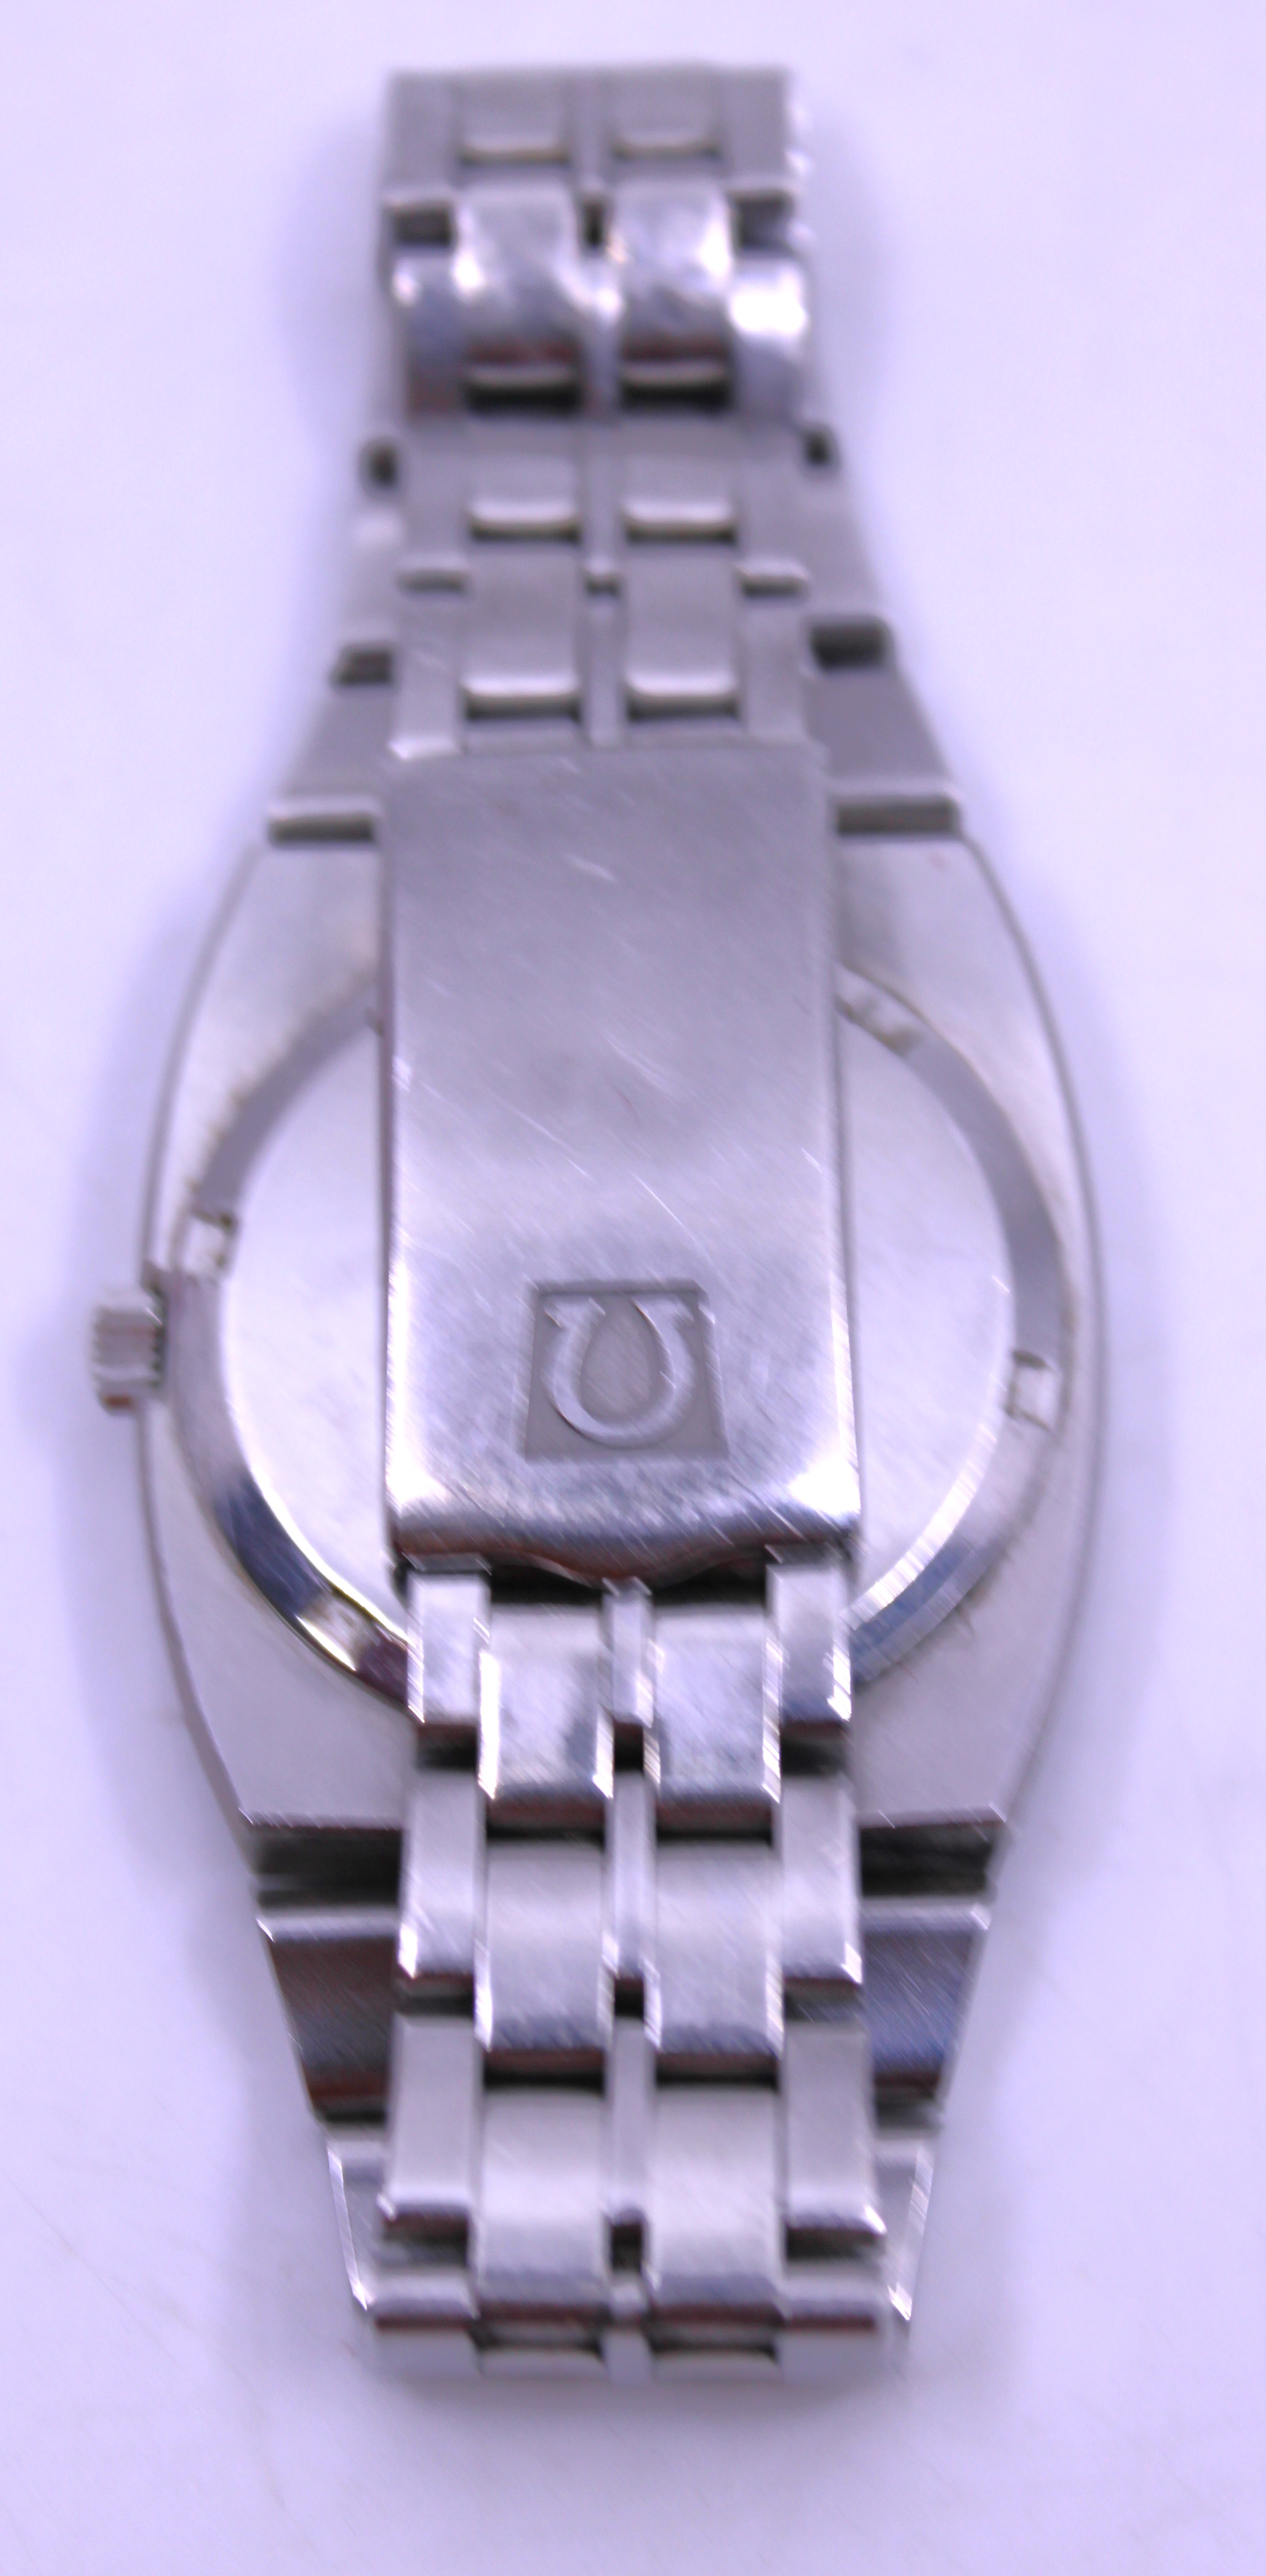 Men's Vintage 1970's? Omega Constellation Automatic Watch. Comes boxed with International Guarantee. - Image 5 of 7